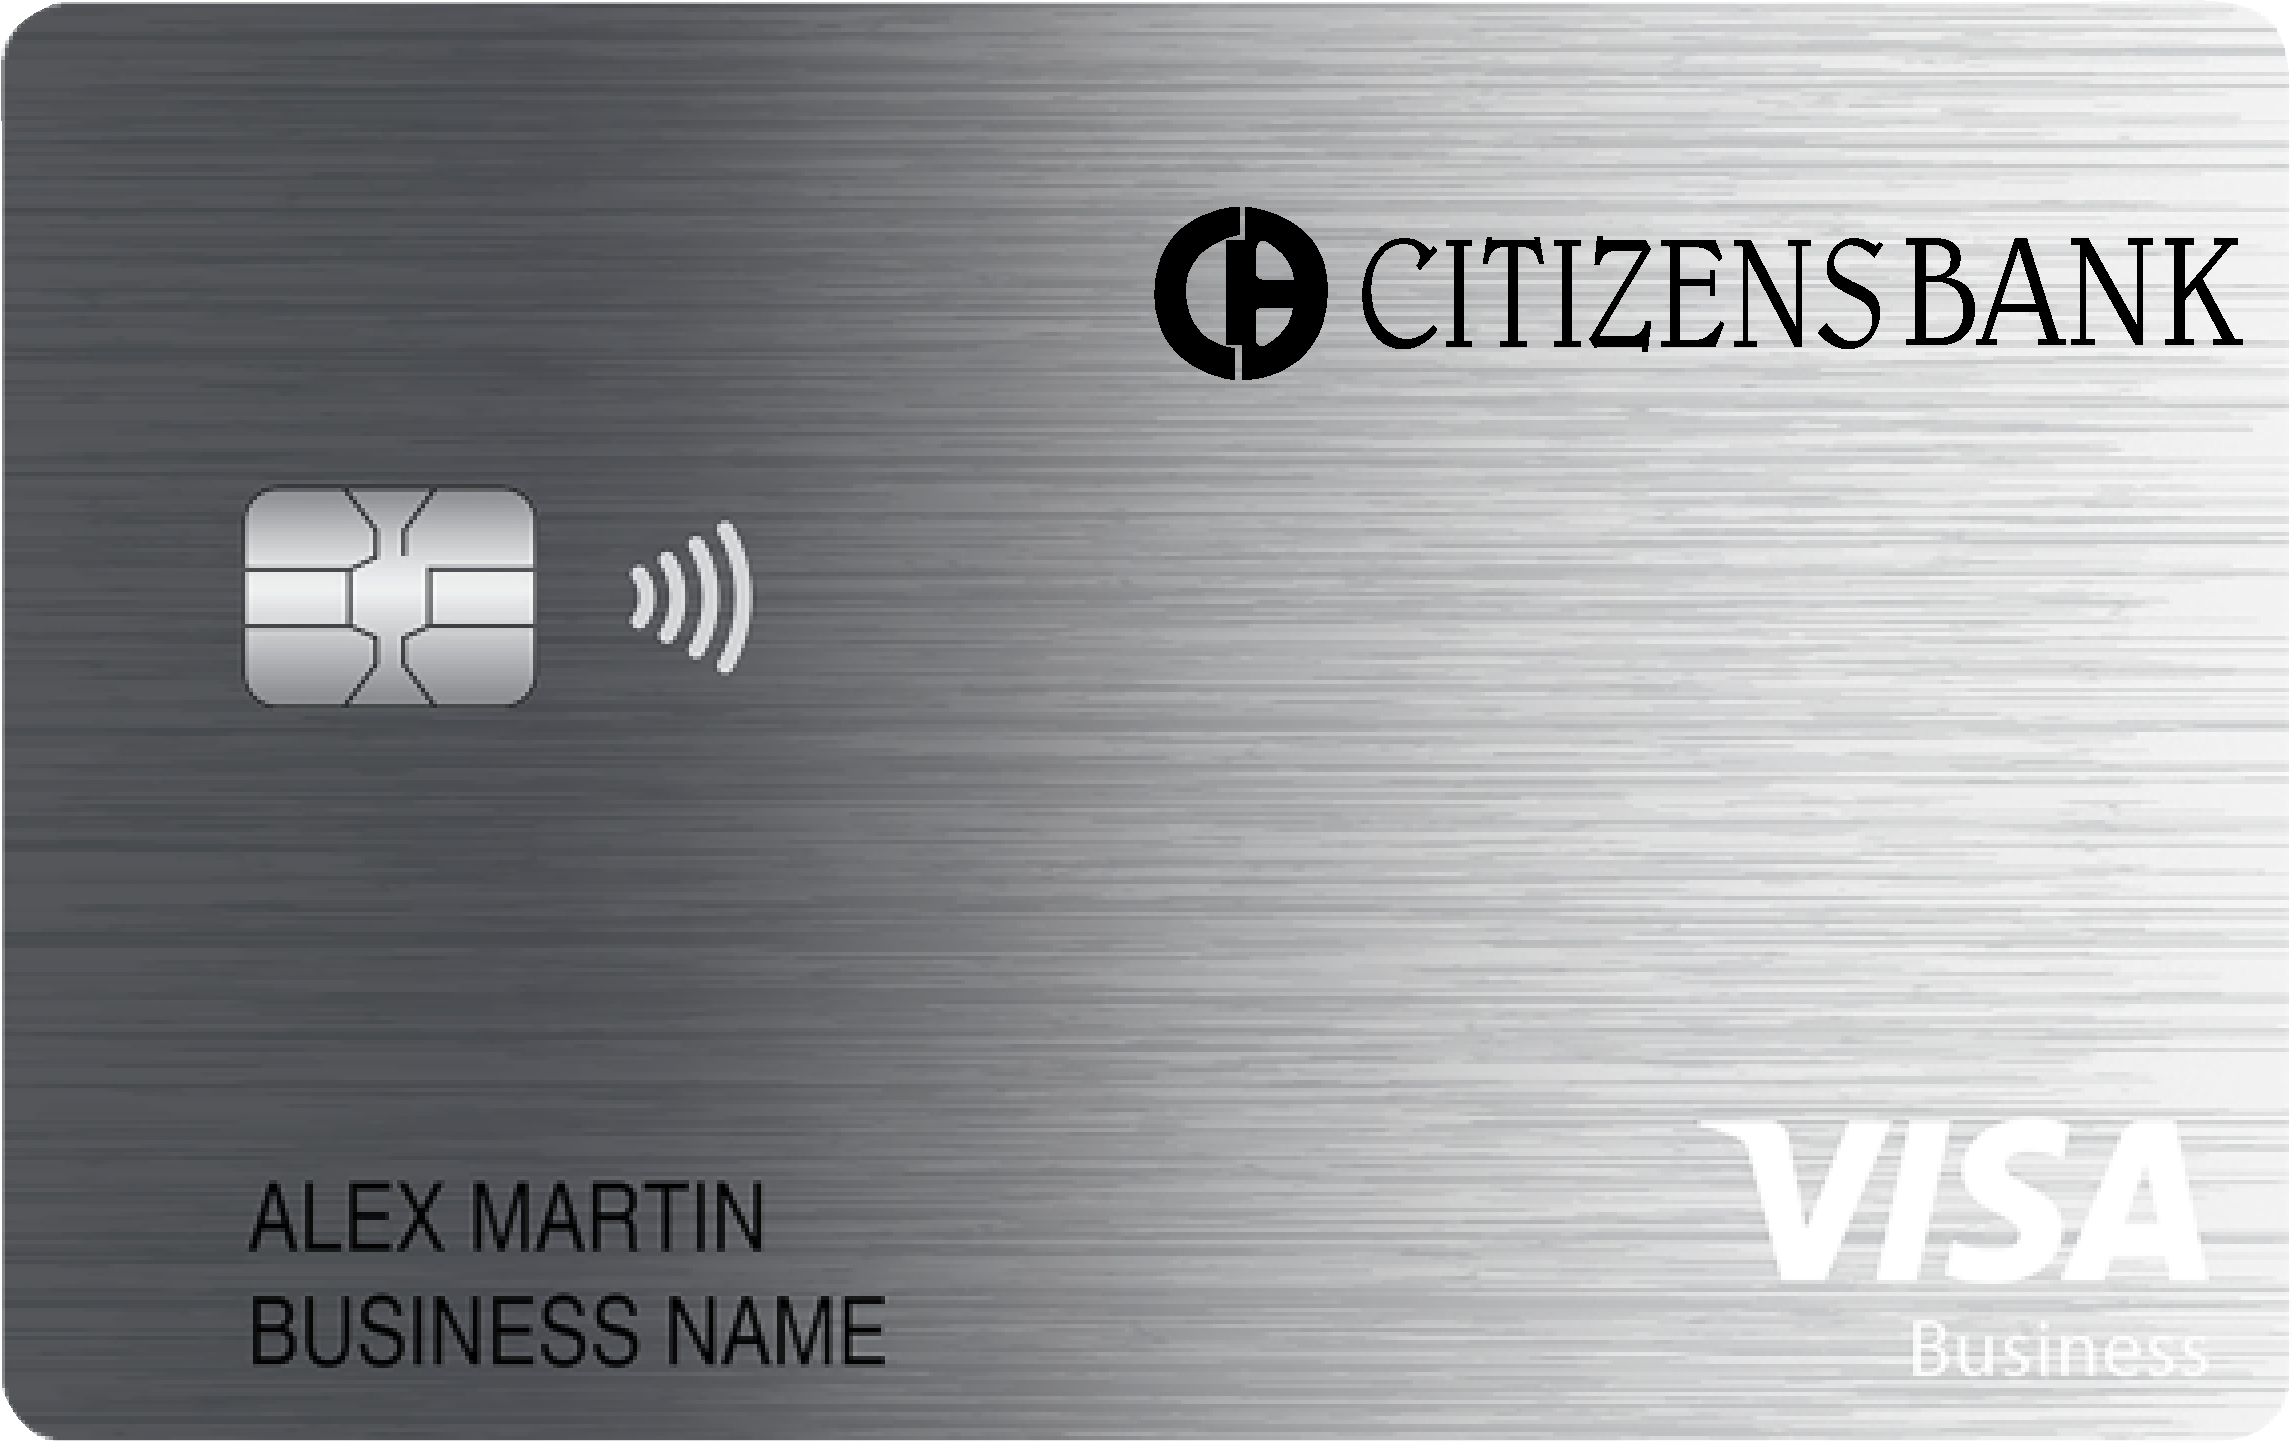 The Citizens Bank Business Real Rewards Card